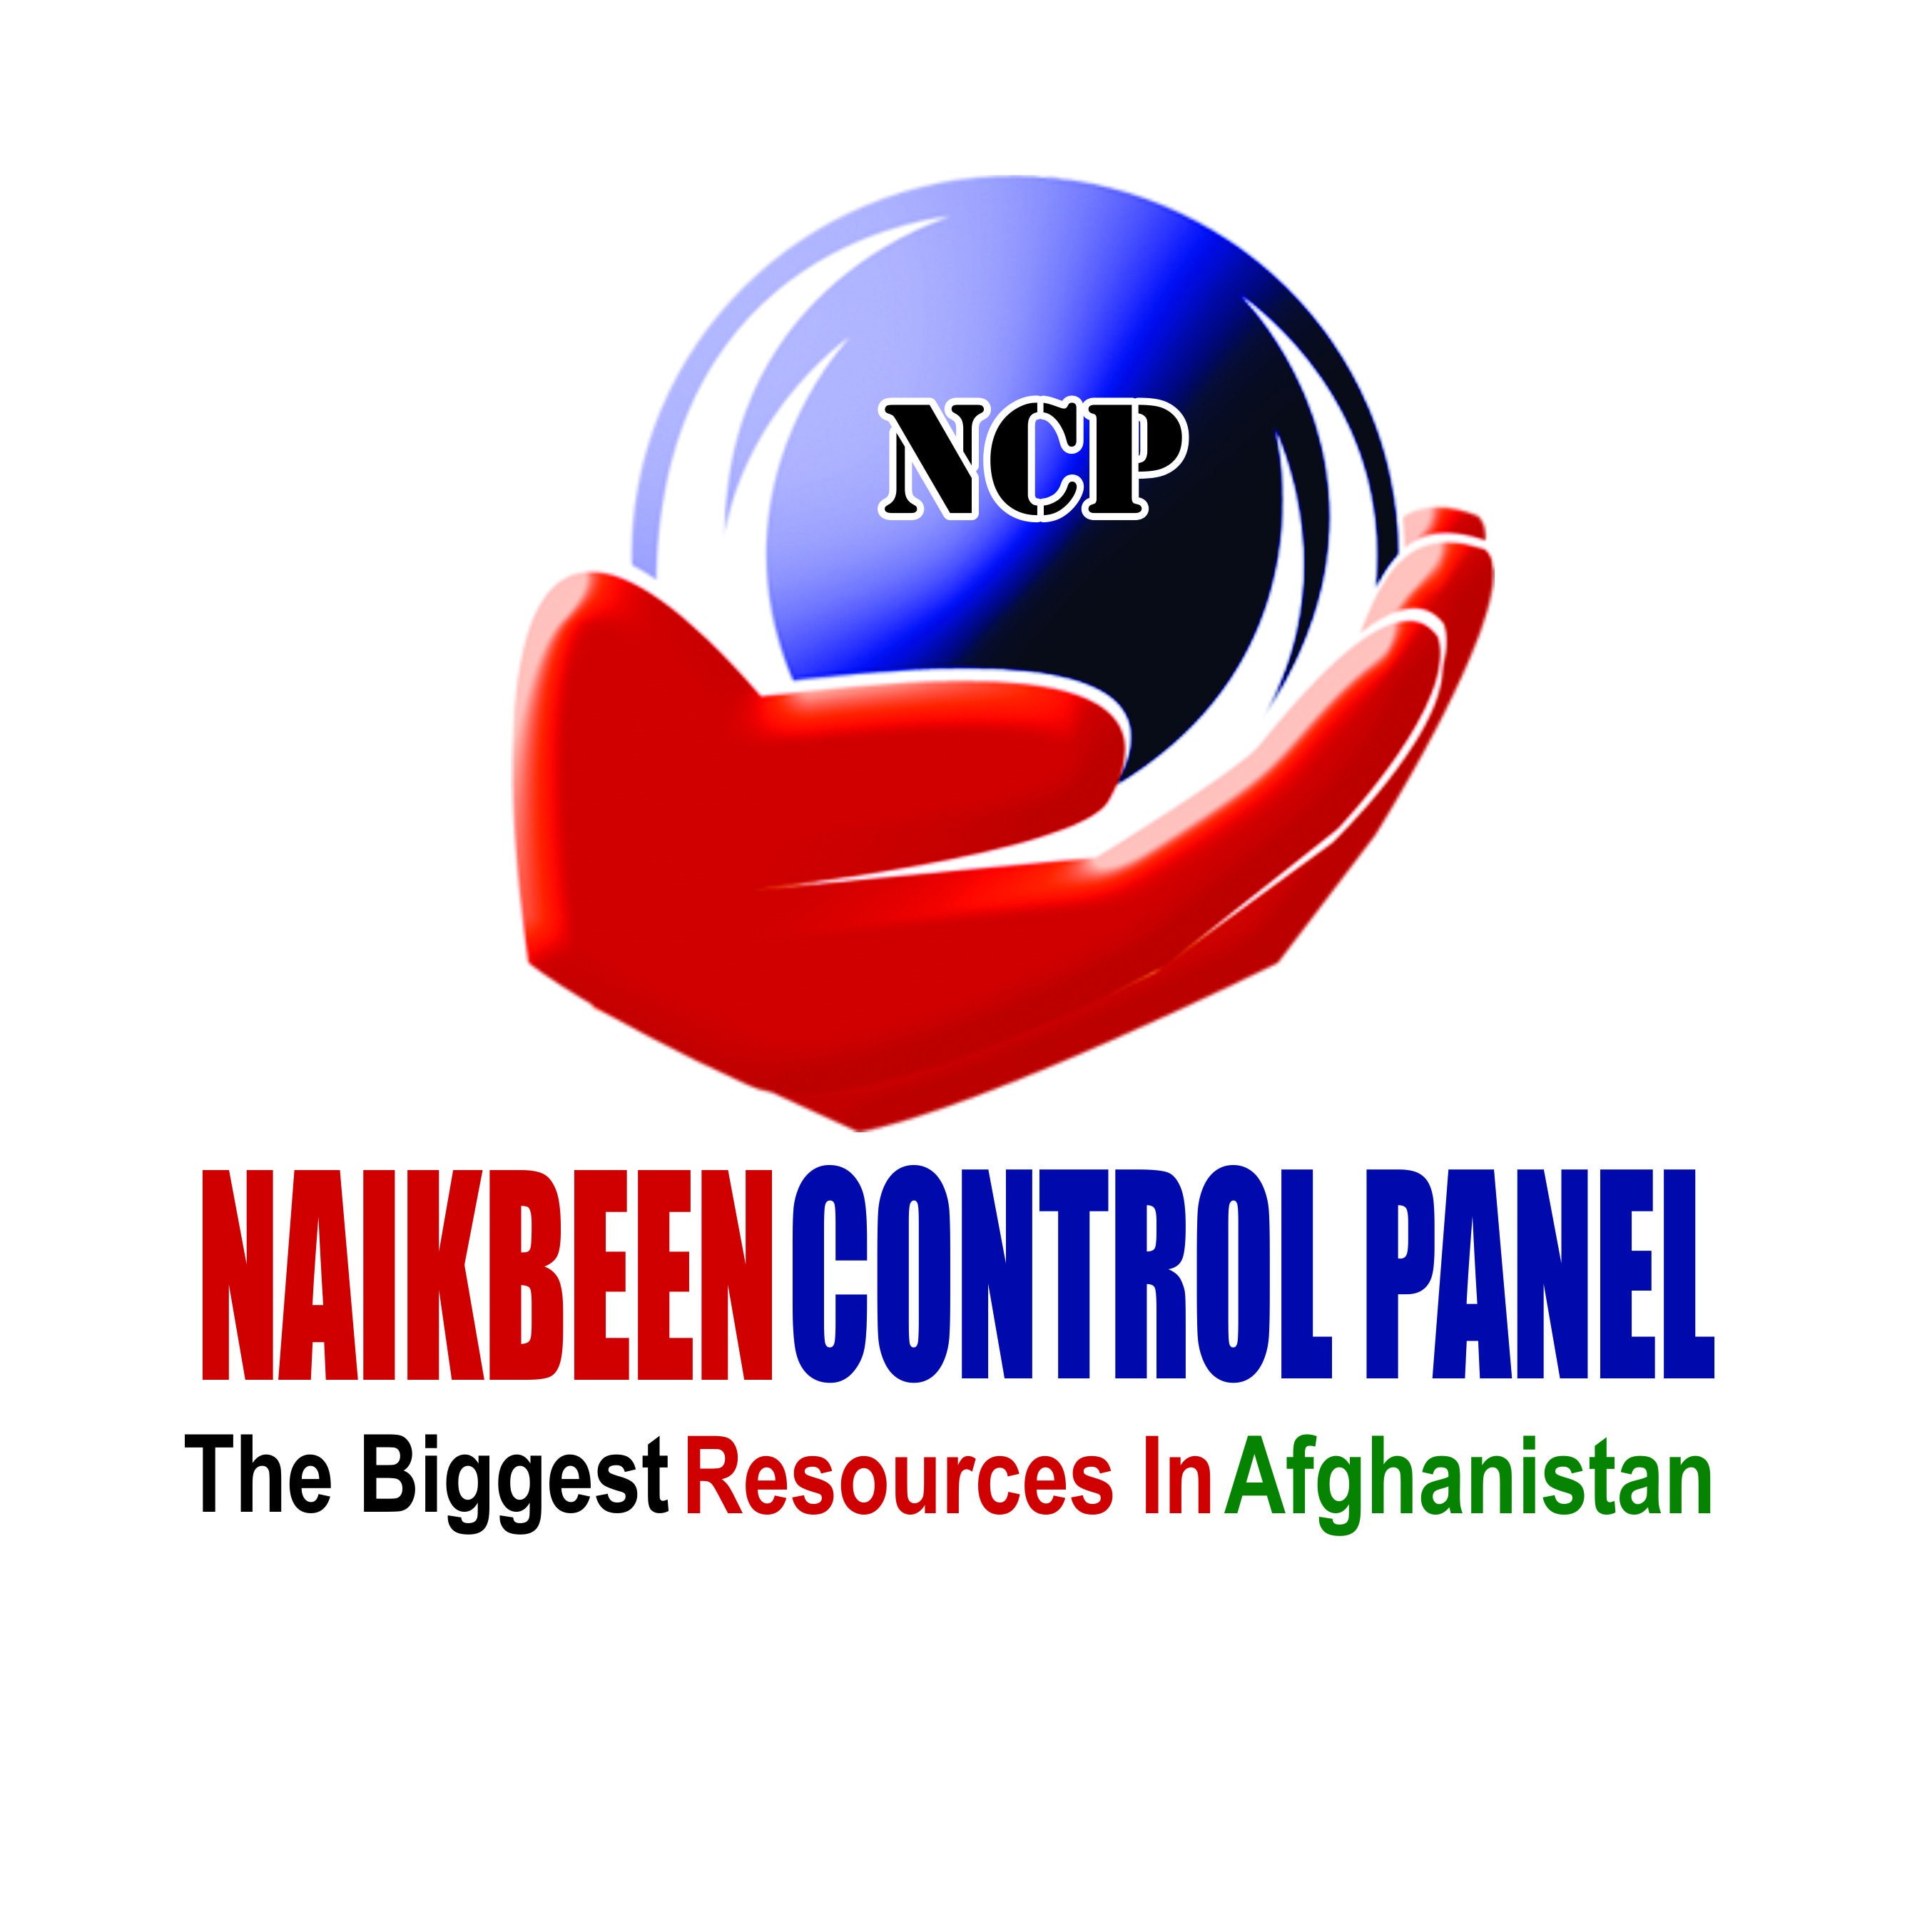 Naikbeen Control Panel